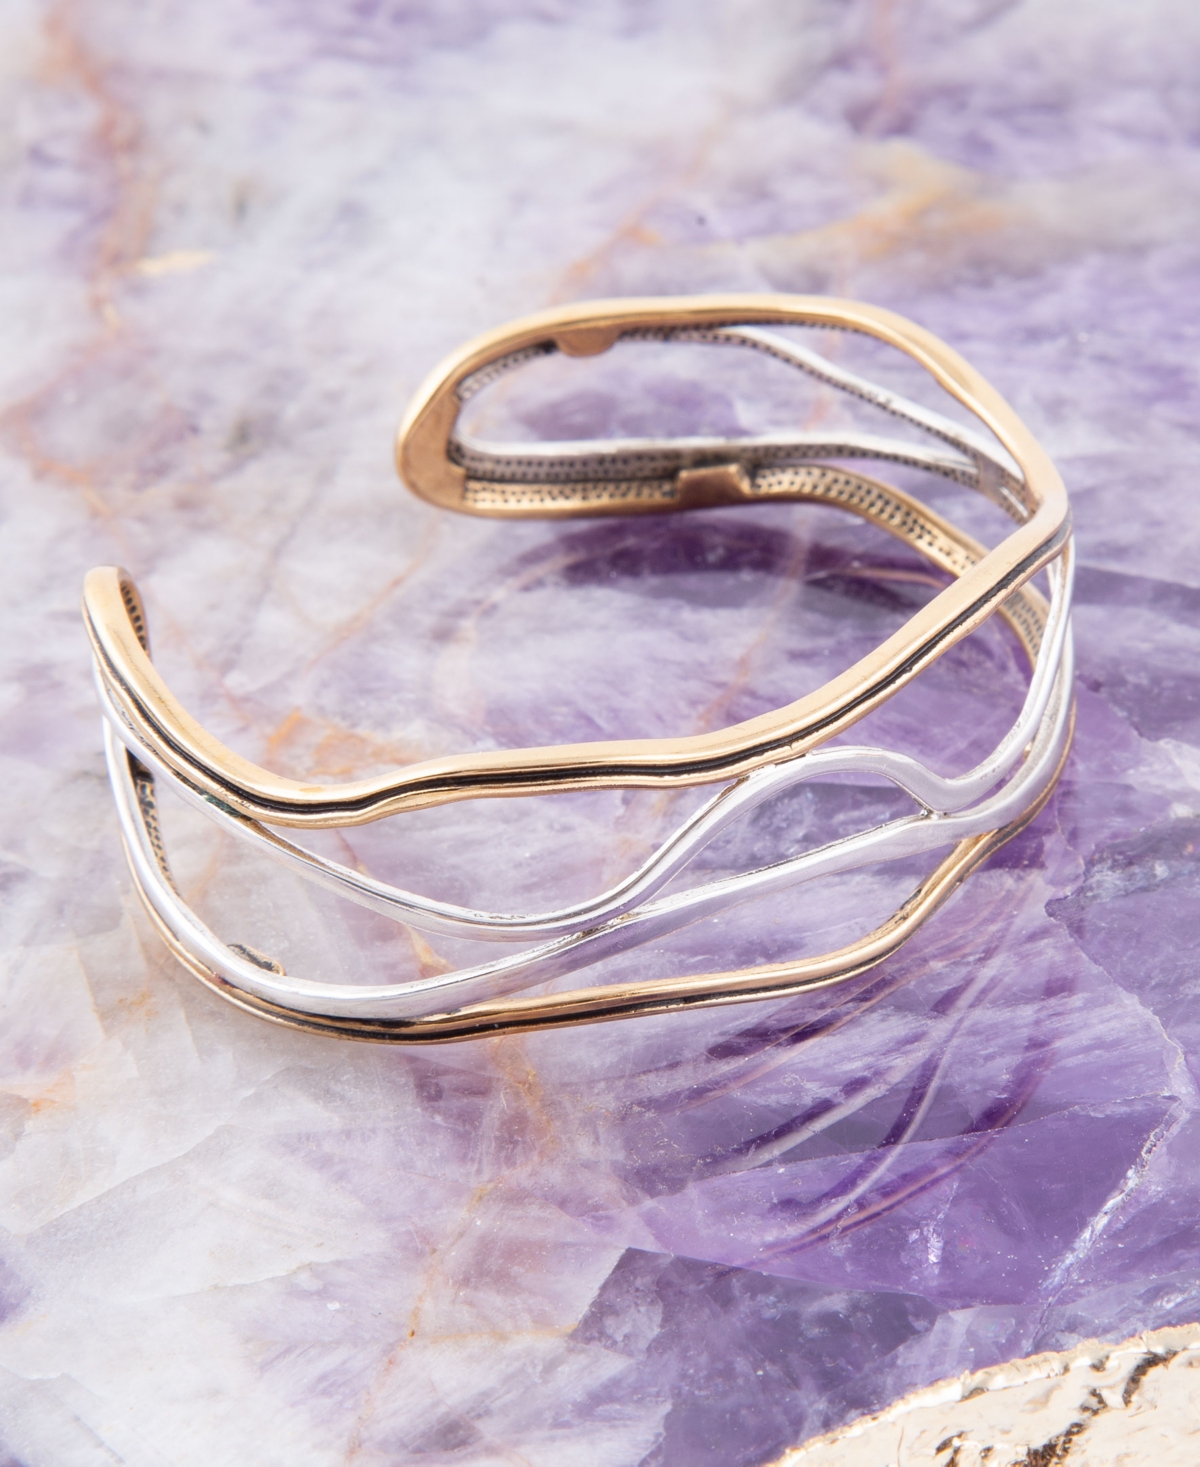 Shop Barse Fresh Genuine Bronze And Sterling Silver Abstract Cuff Bracelet In Genuine Sterling Silver And Golden Bronz